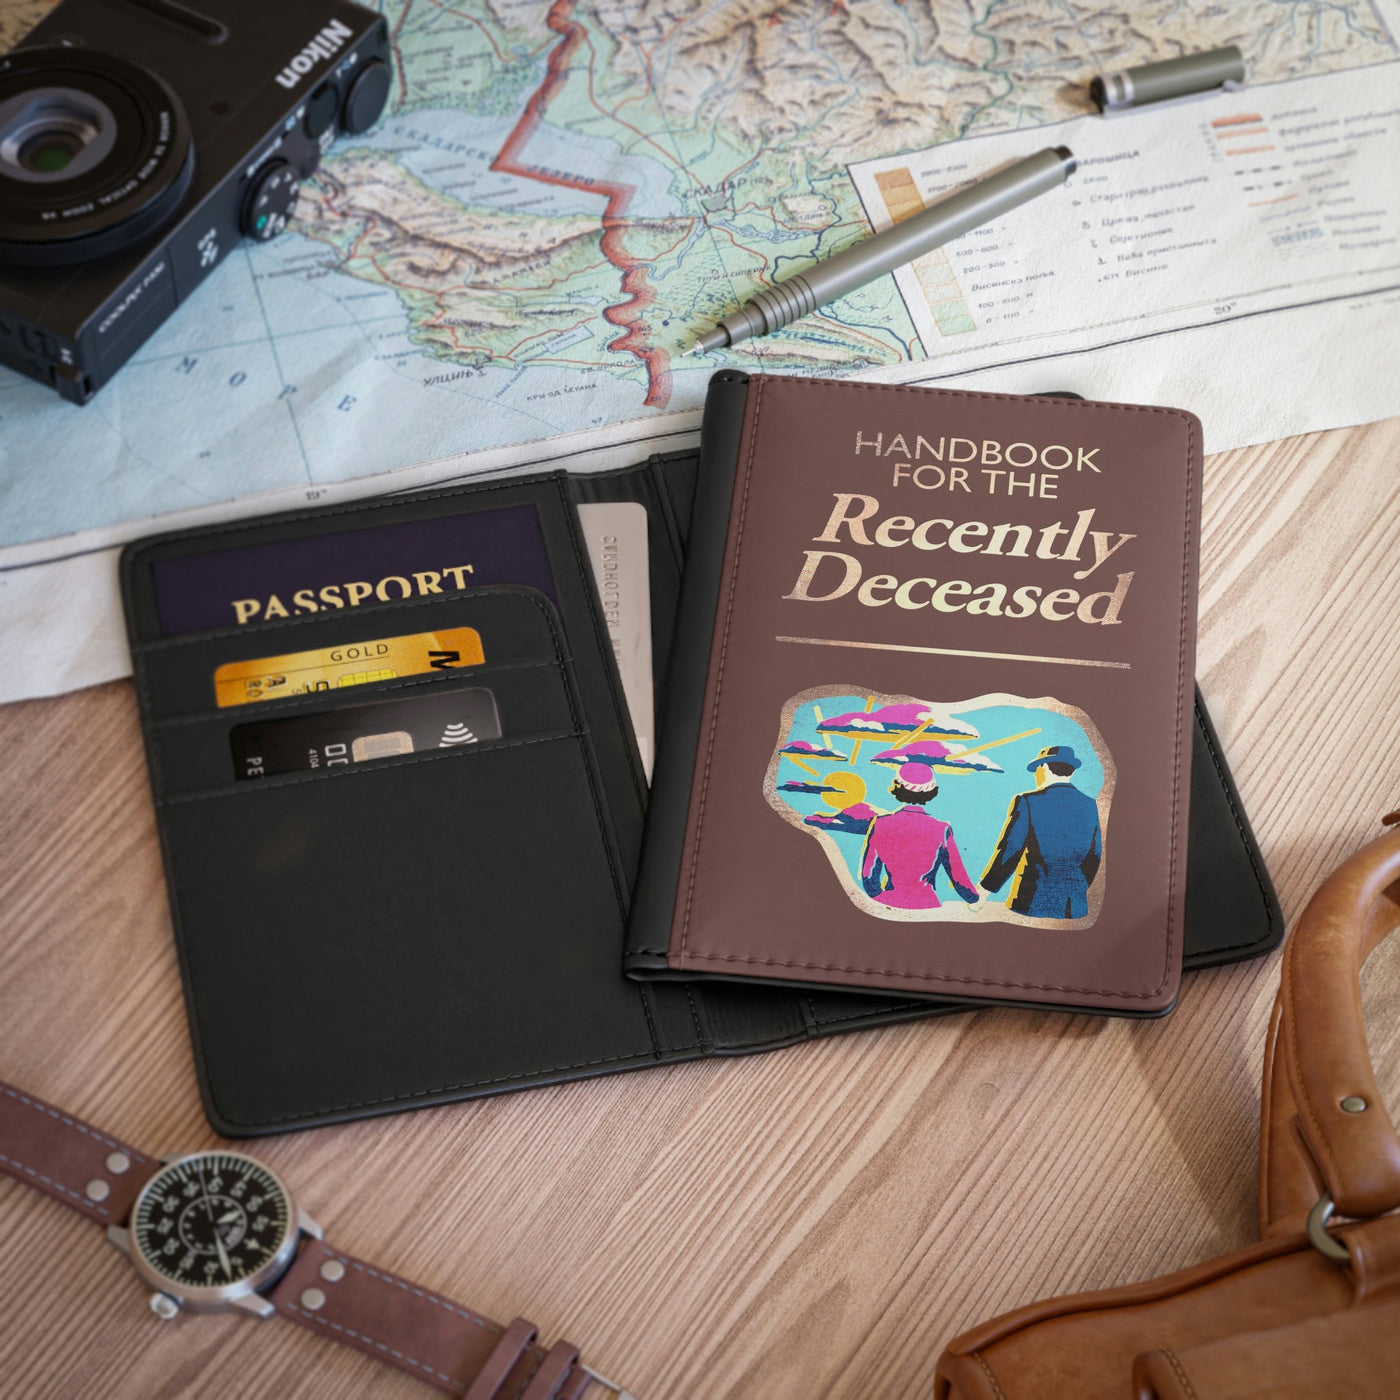 The Handbook for the recently deceased - Beetlejuice, Passport Cover | TimeElements.shop